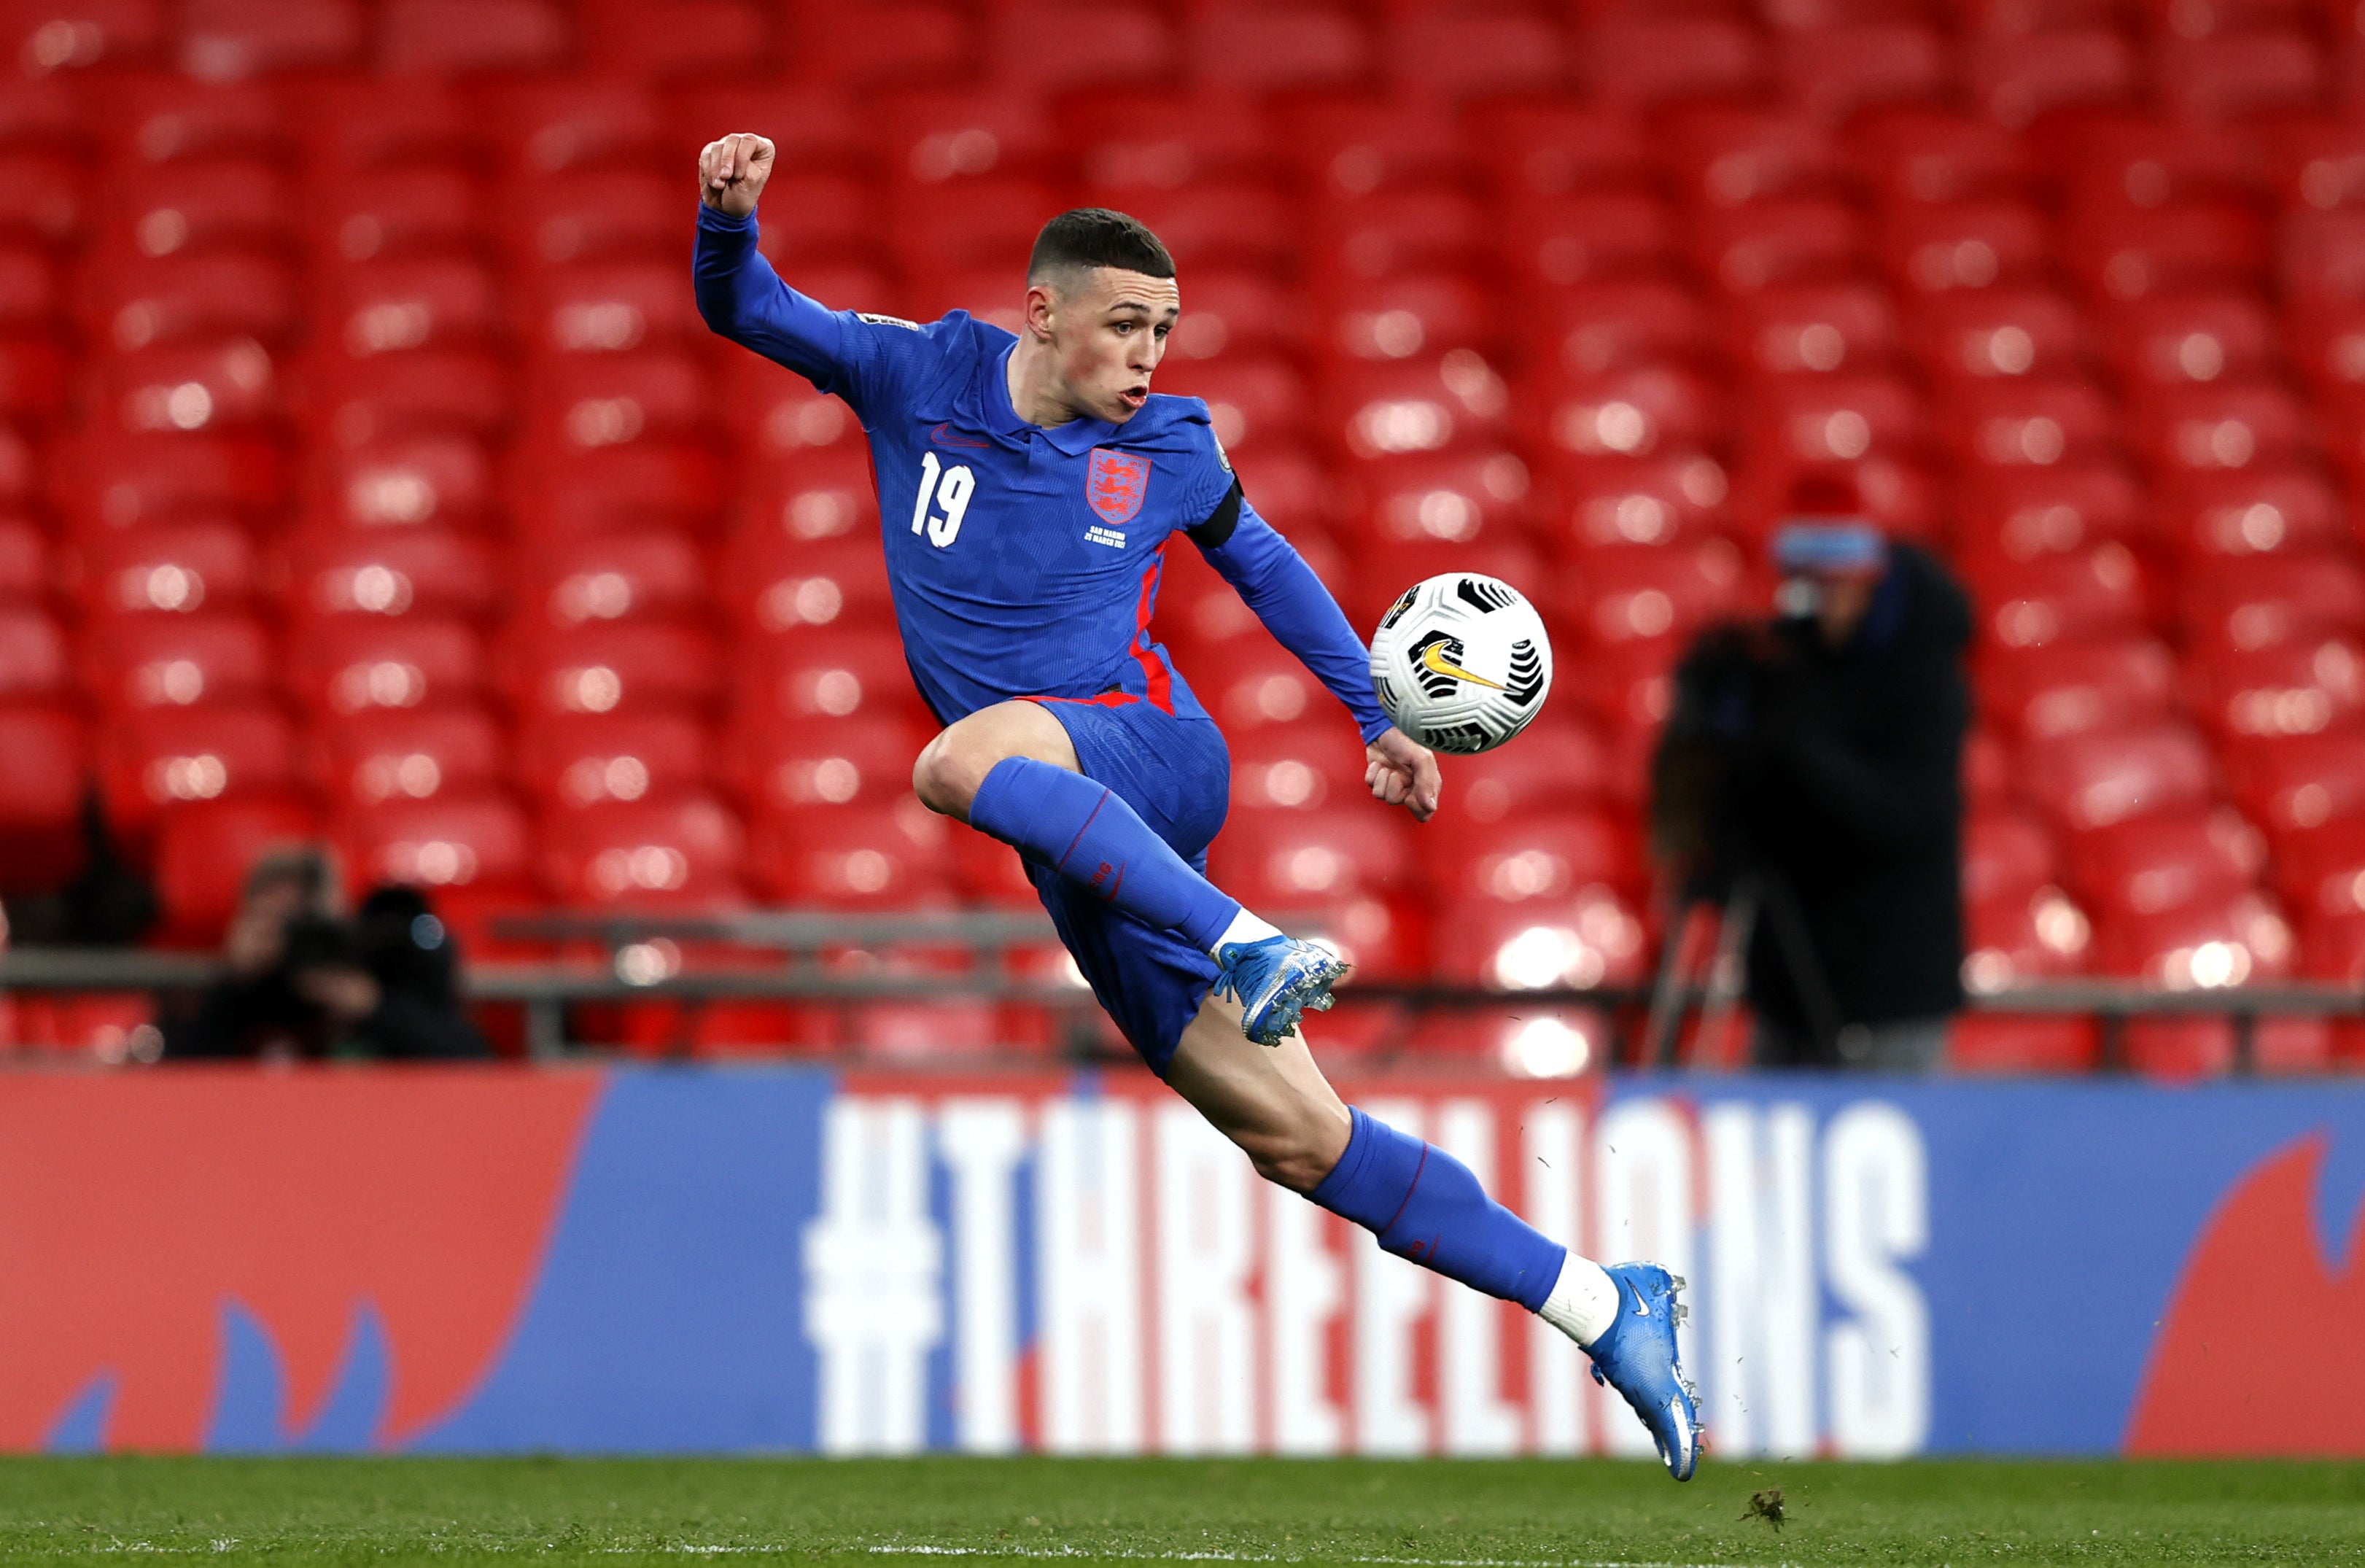 Phil Foden can be one of the stars at Euro 2020 according to England great Peter Shilton